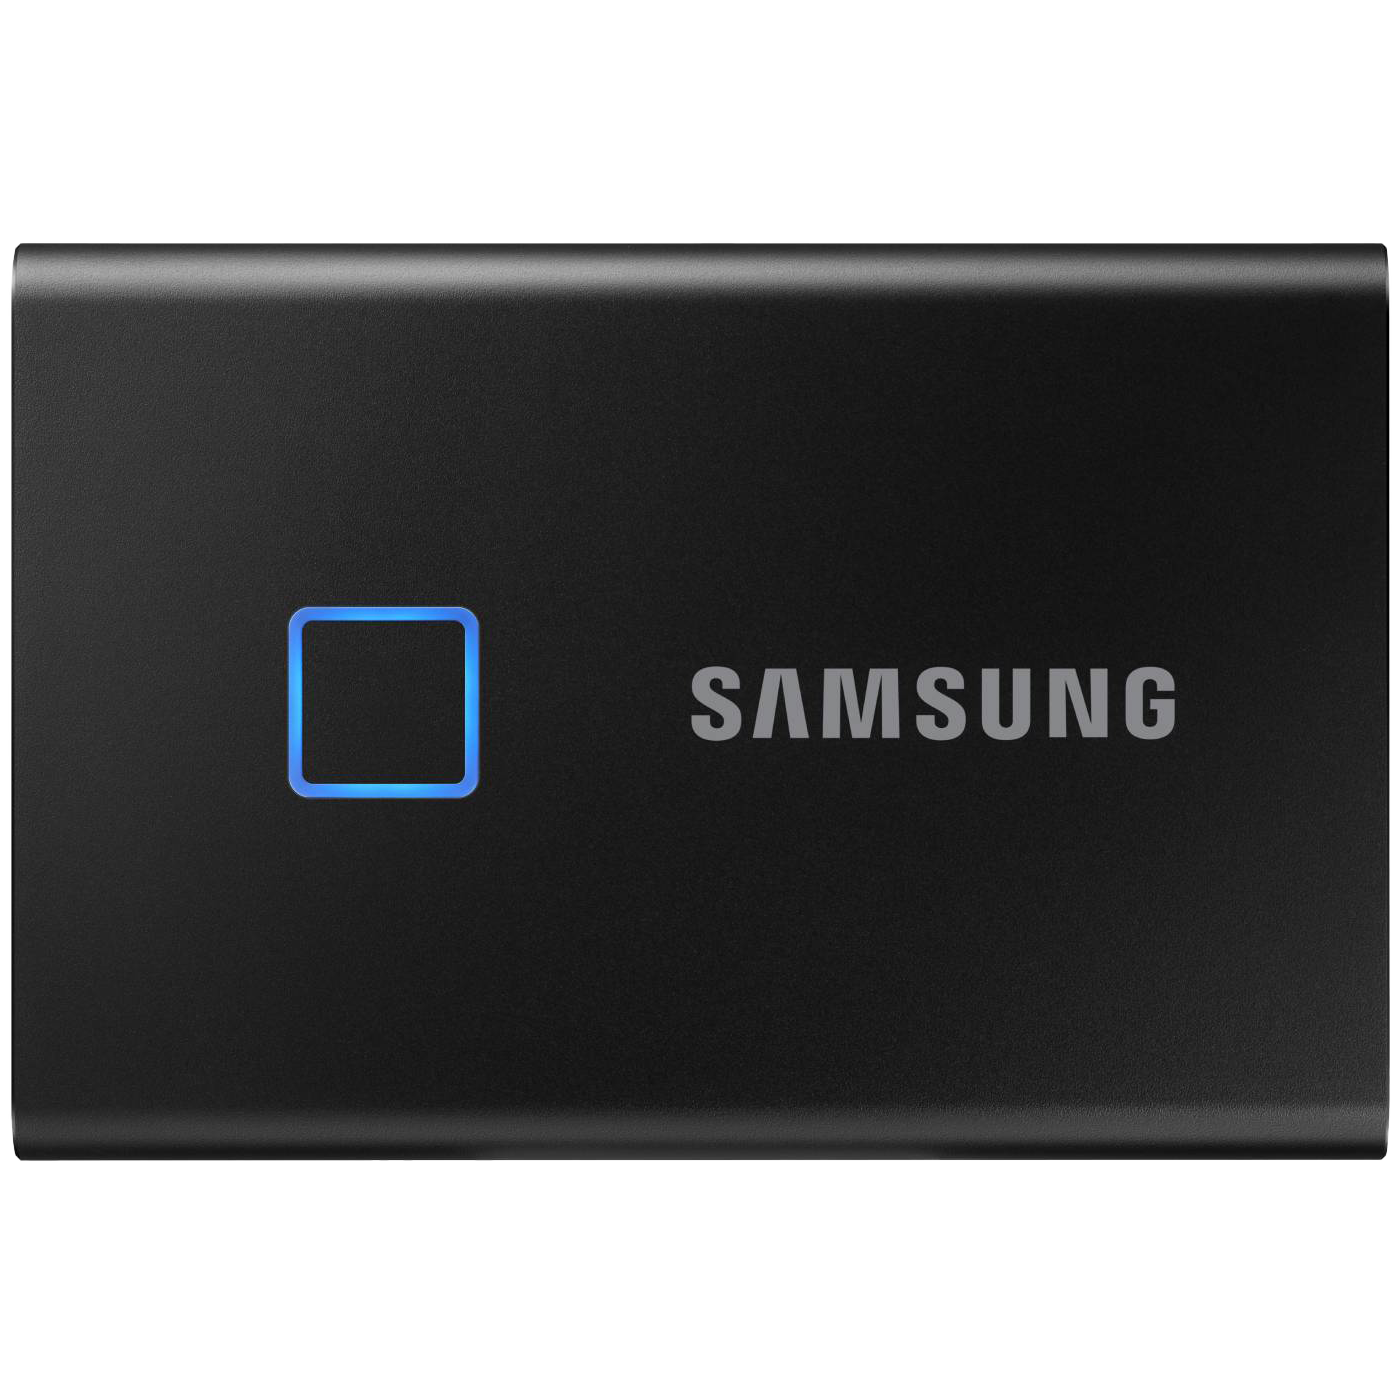 Best accessories for the Samsung Galaxy Book 2 Business in 2023